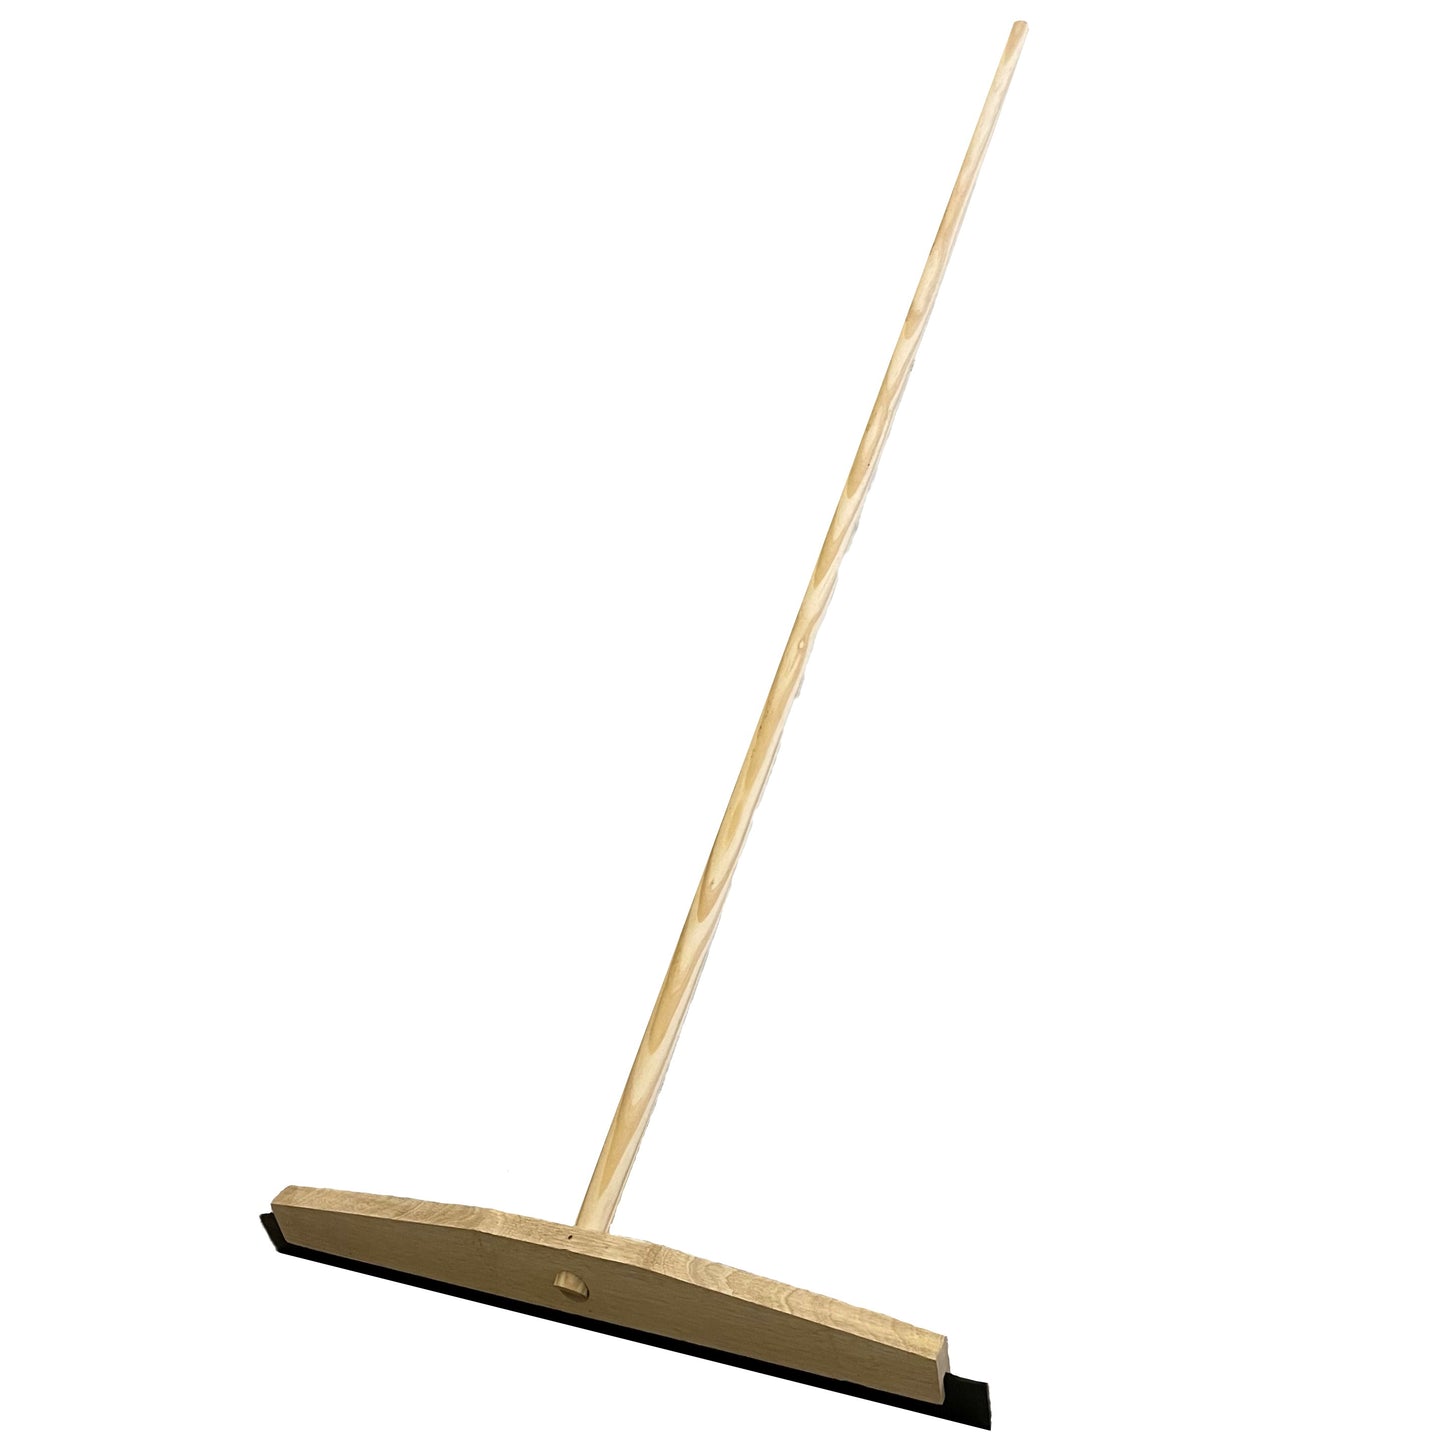 24" Wooden Squeegee with Strong Rubber Head